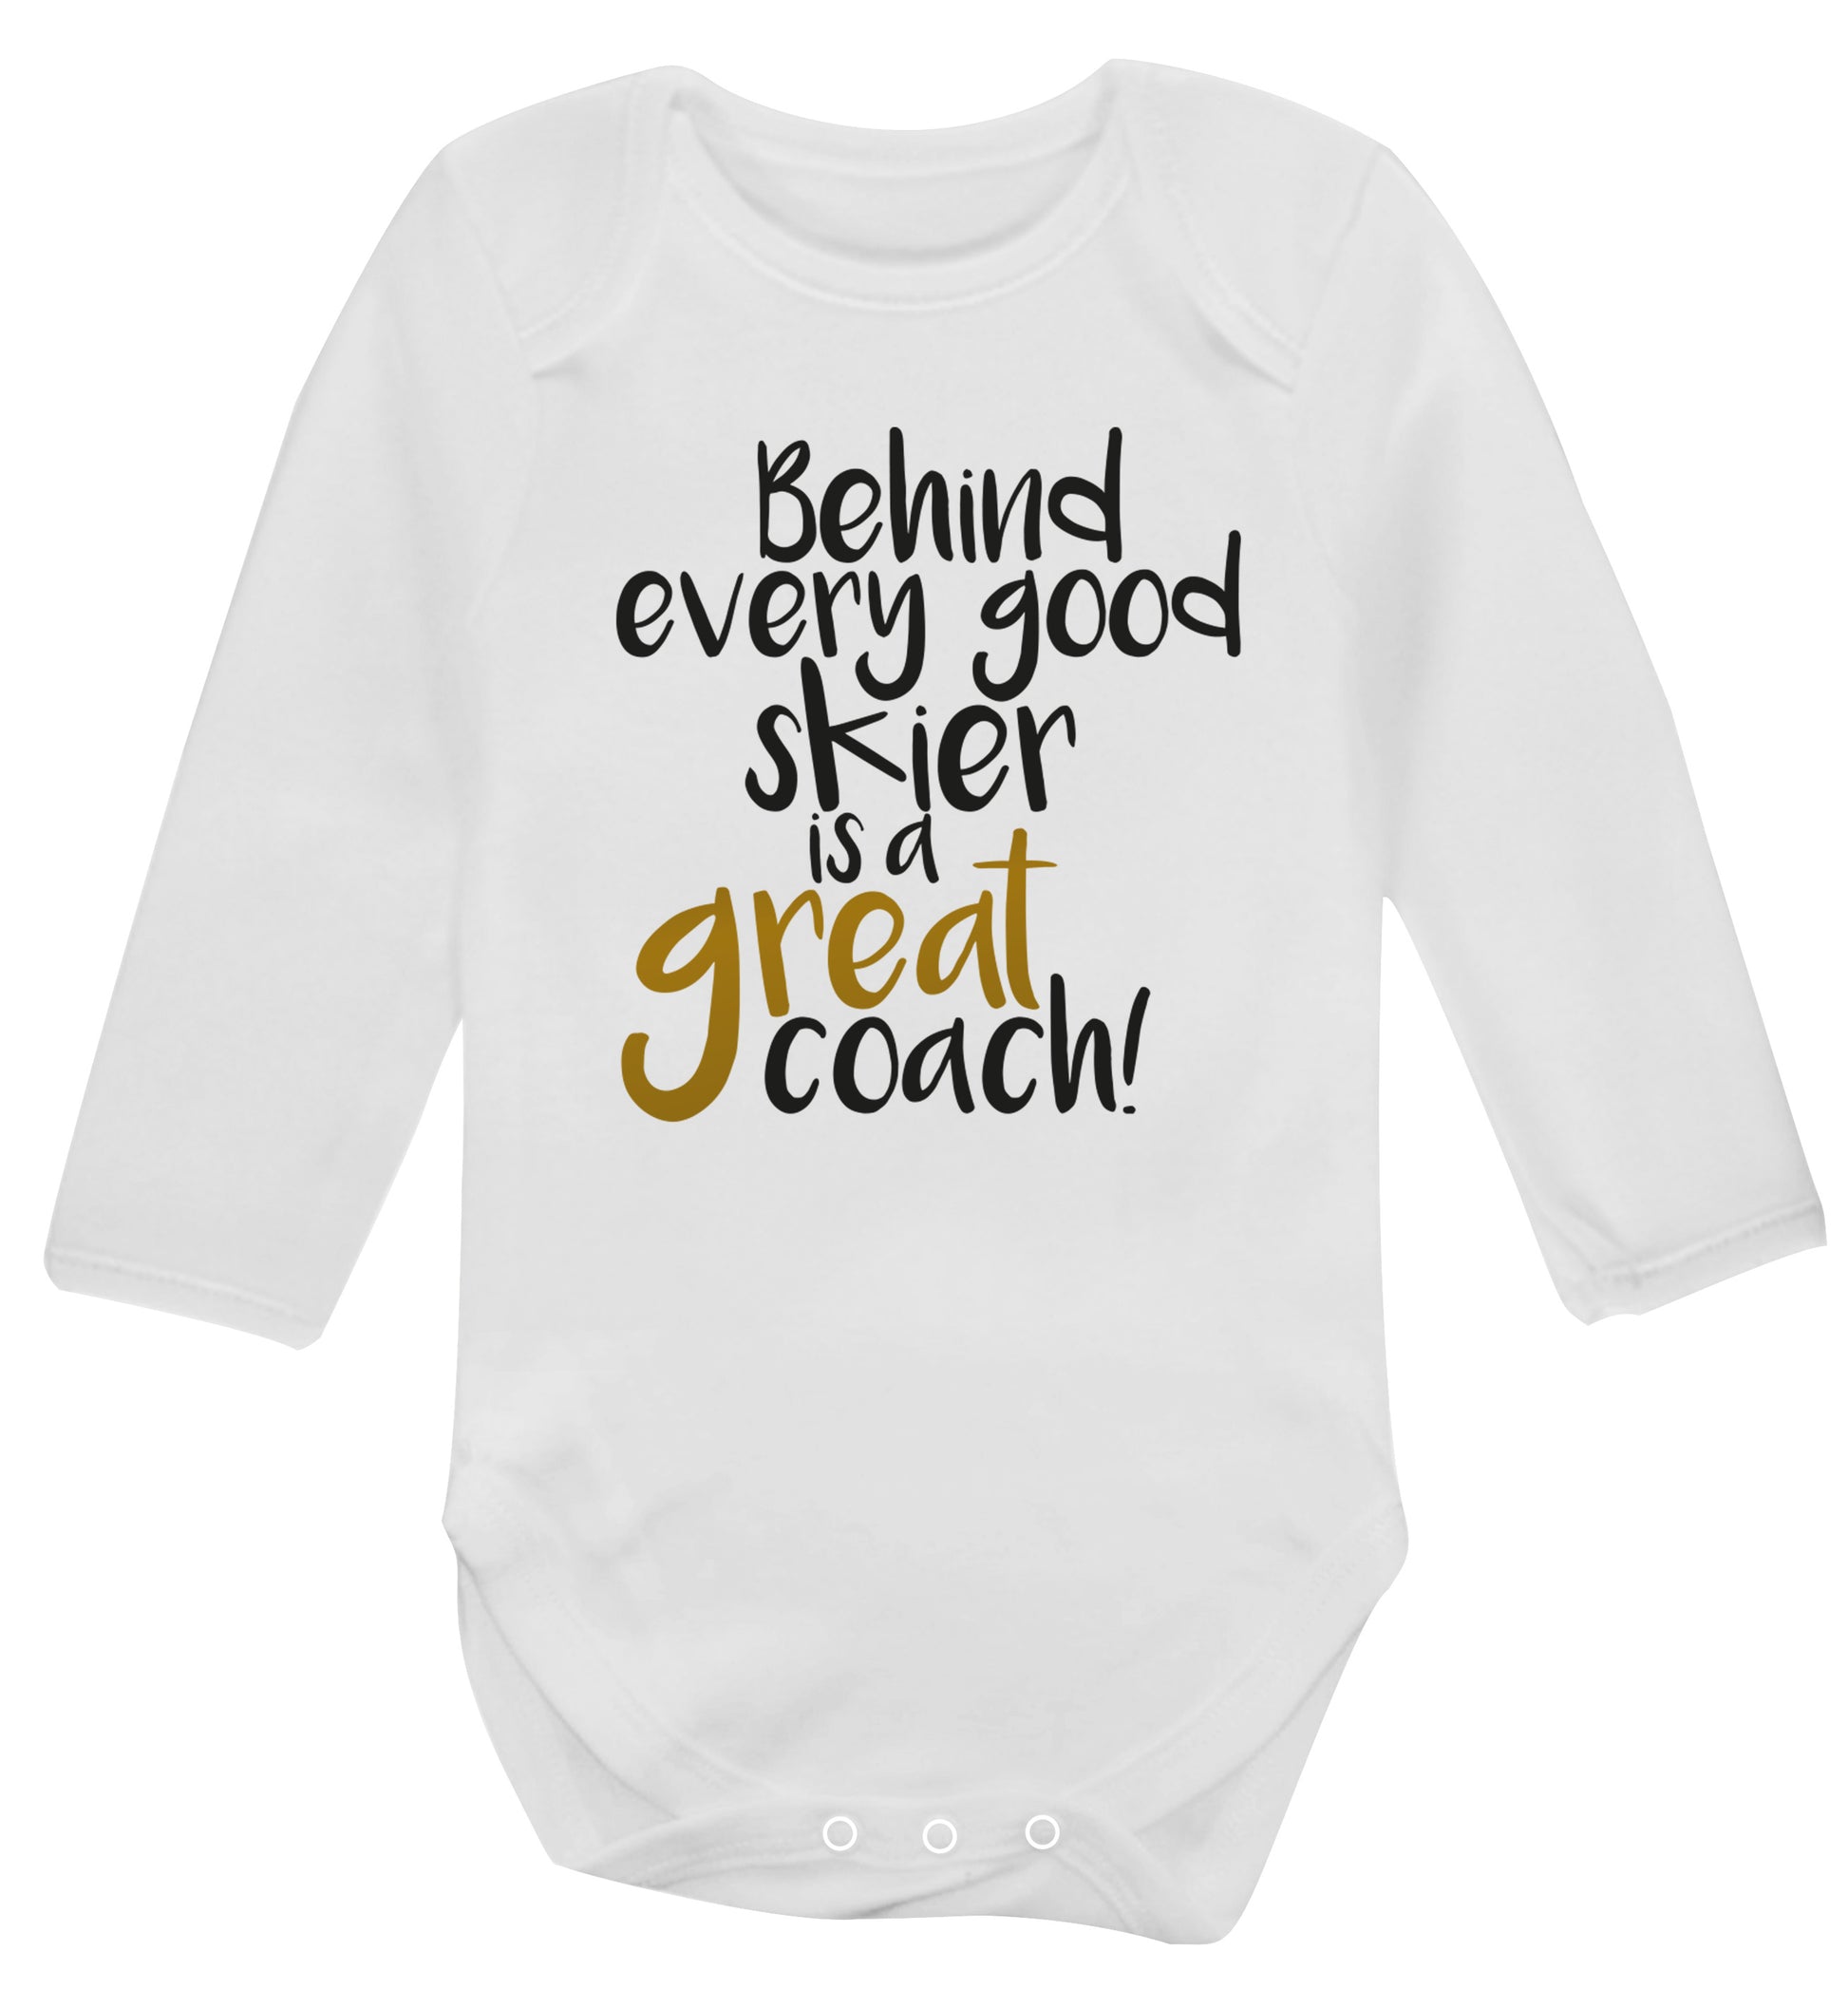 Behind every good skier is a great coach! Baby Vest long sleeved white 6-12 months